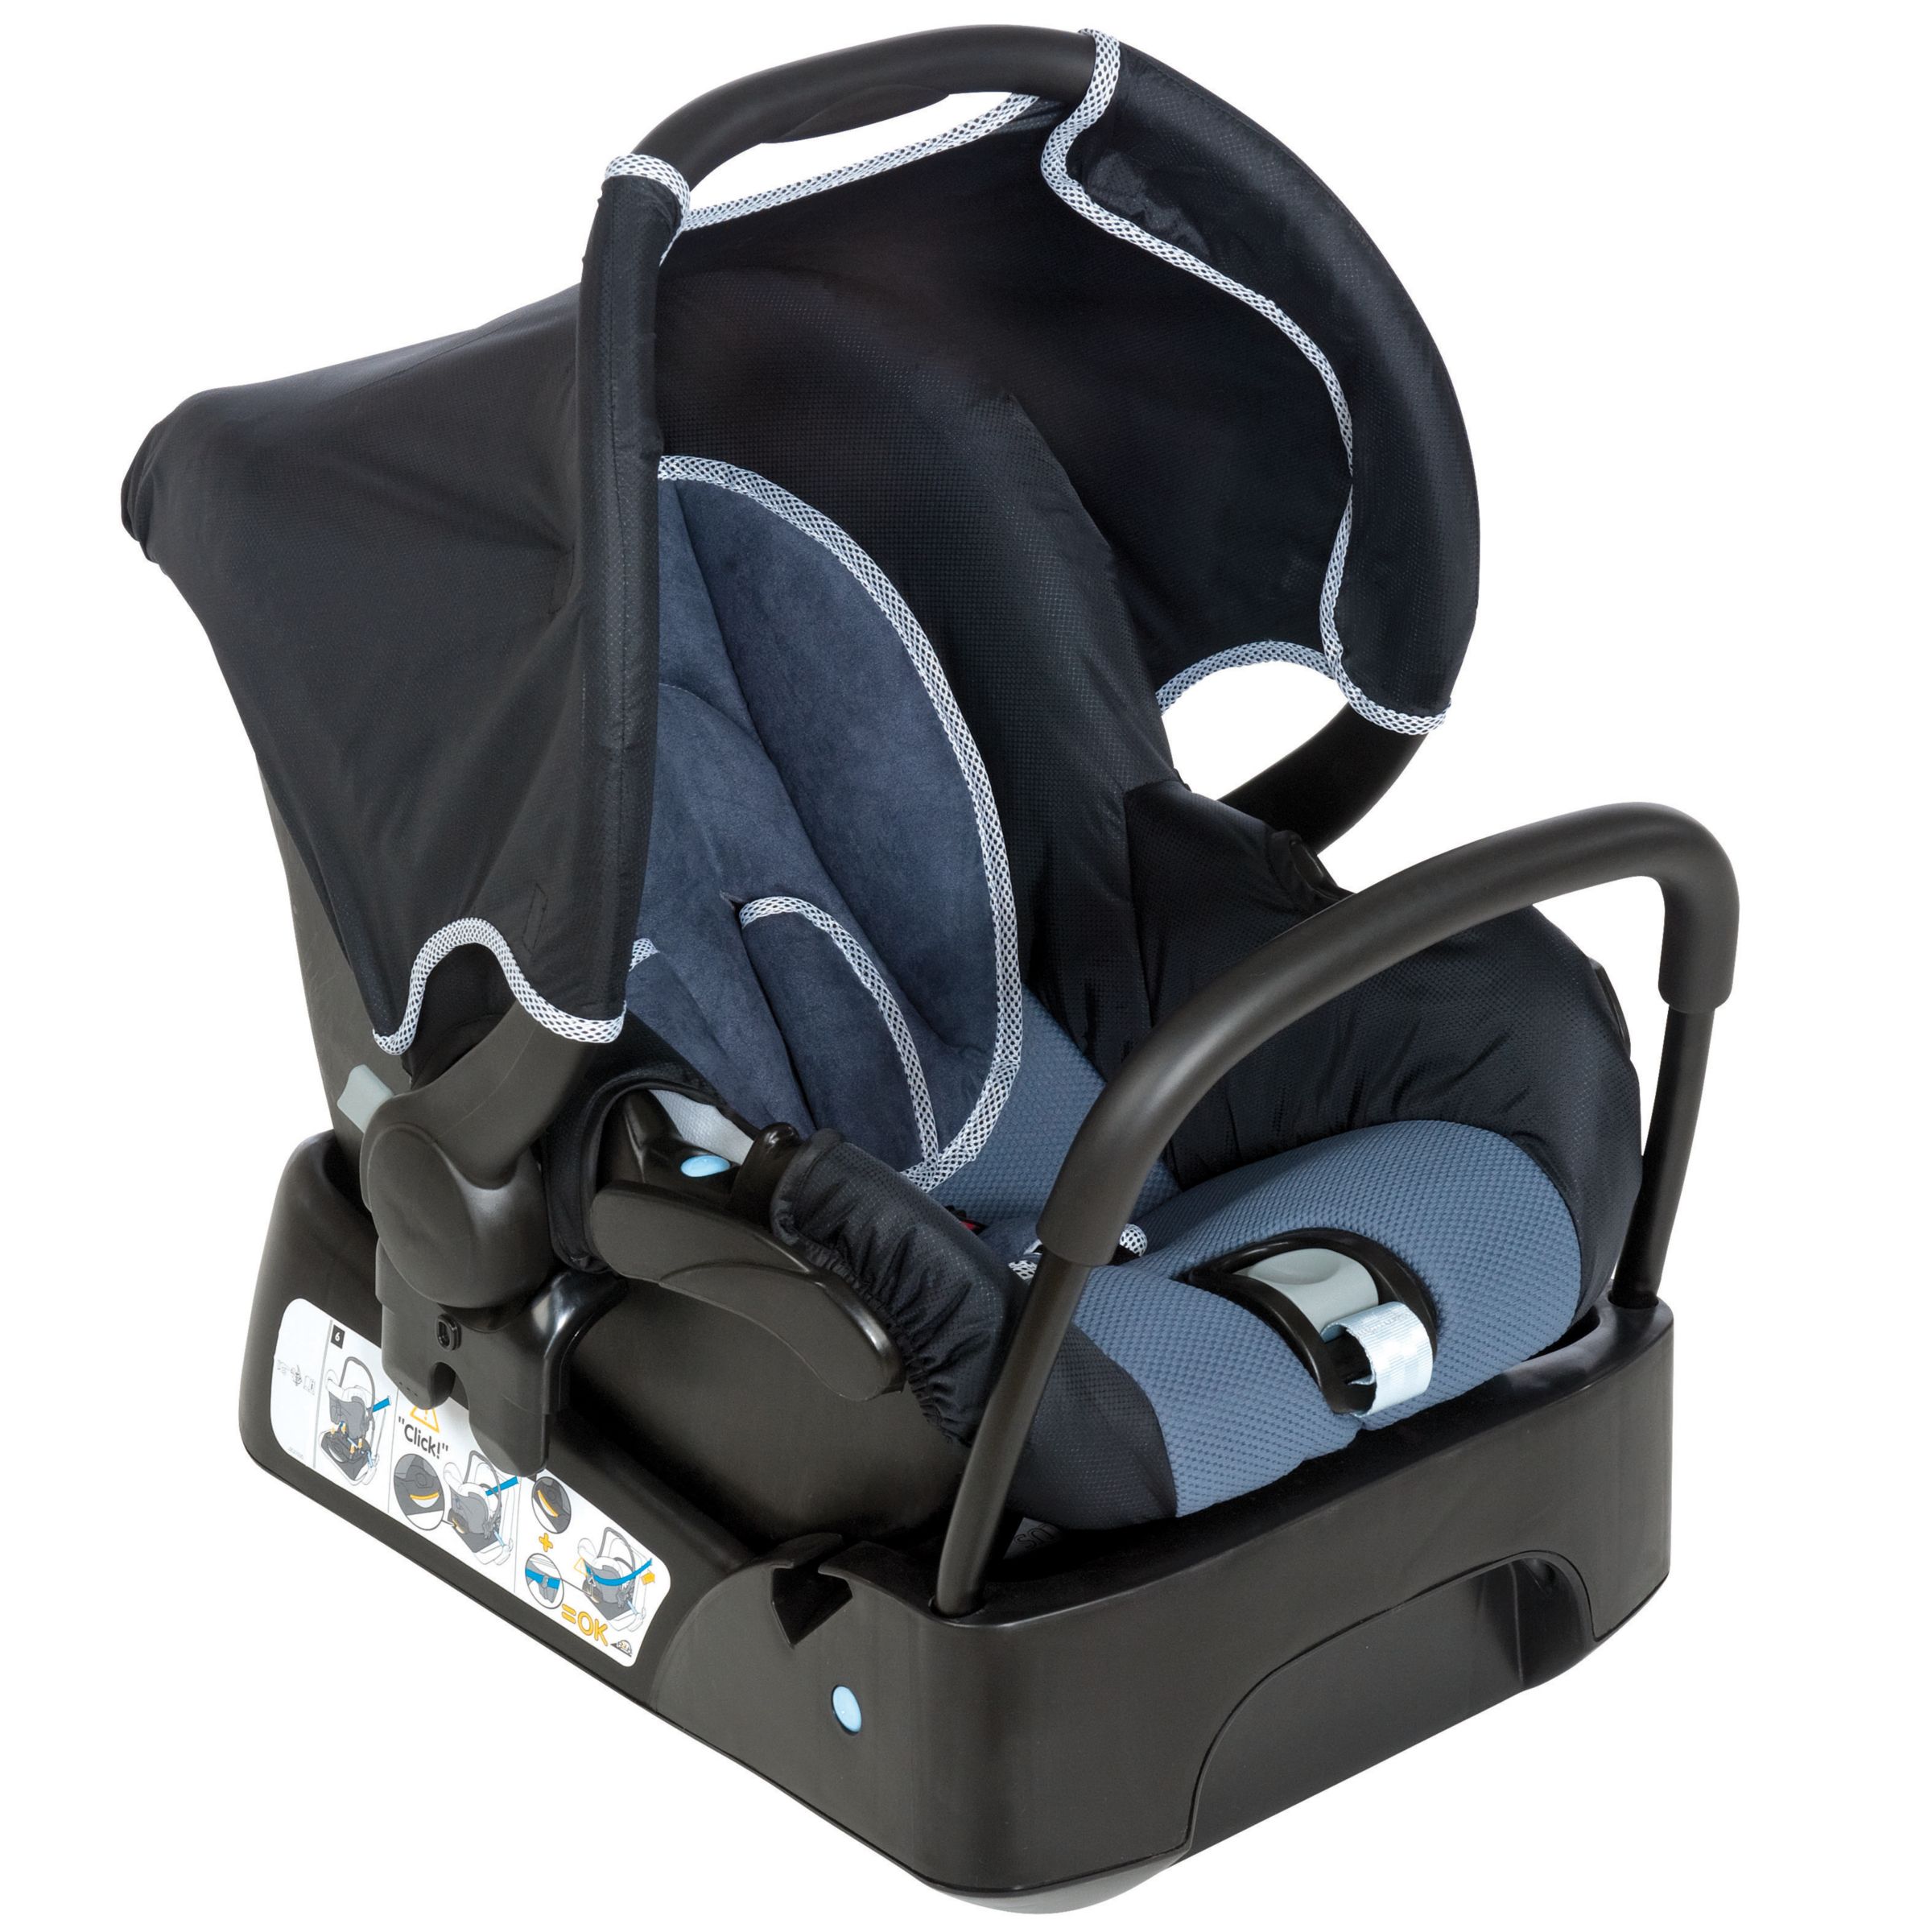 Safety 1st One Safe Plus Infant Carrier and